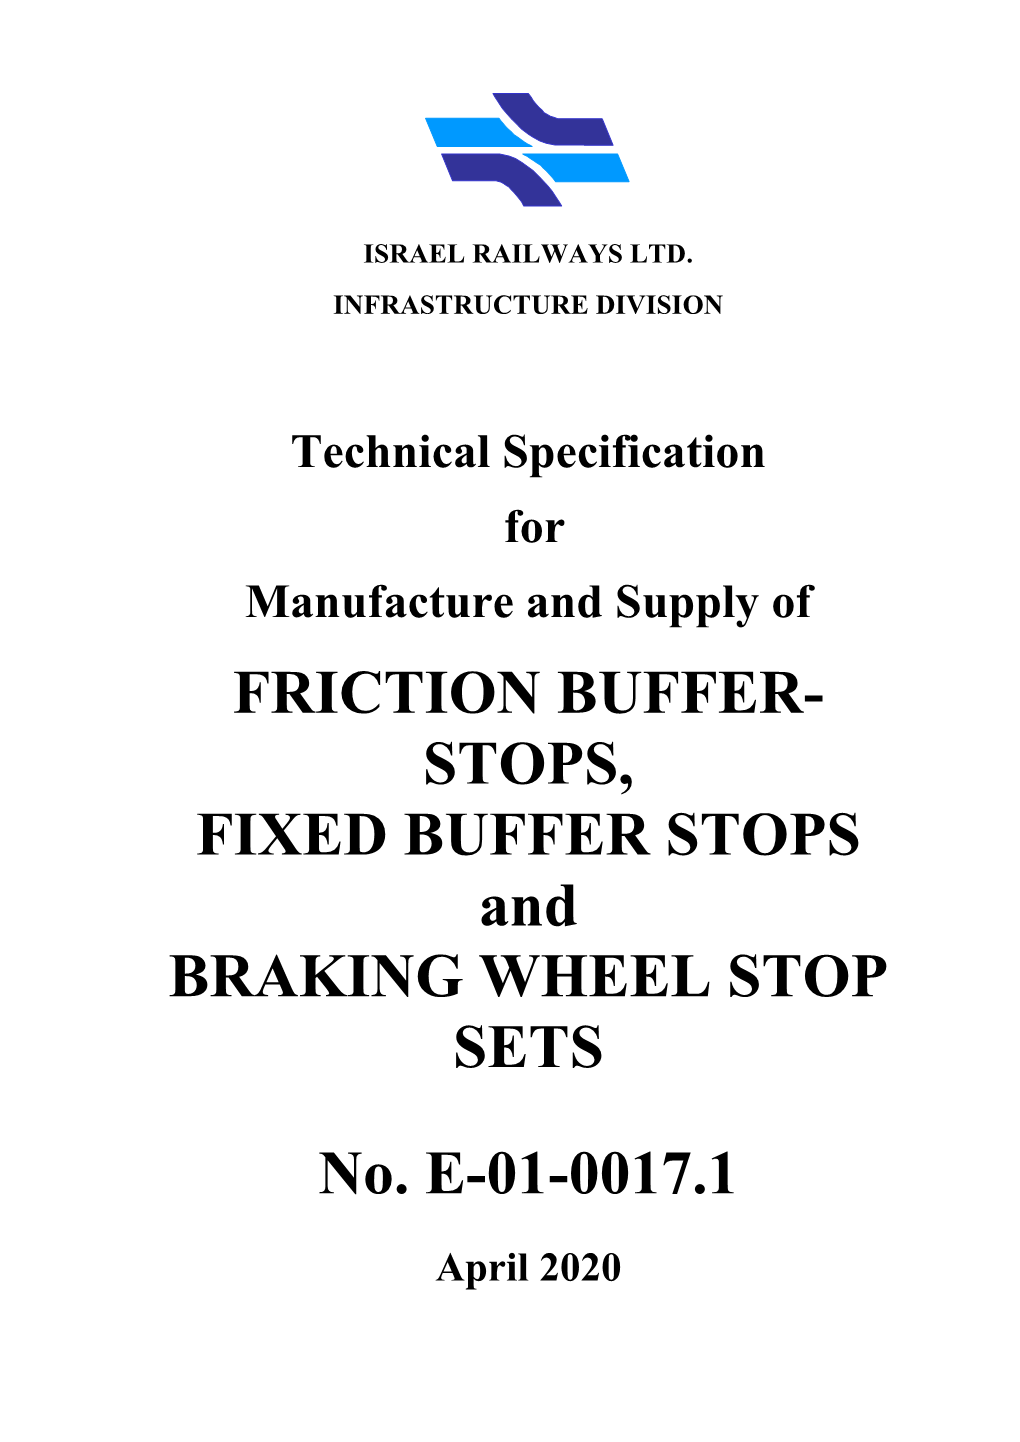 Technical Specification for ON-TRACK RAIL GRINDING